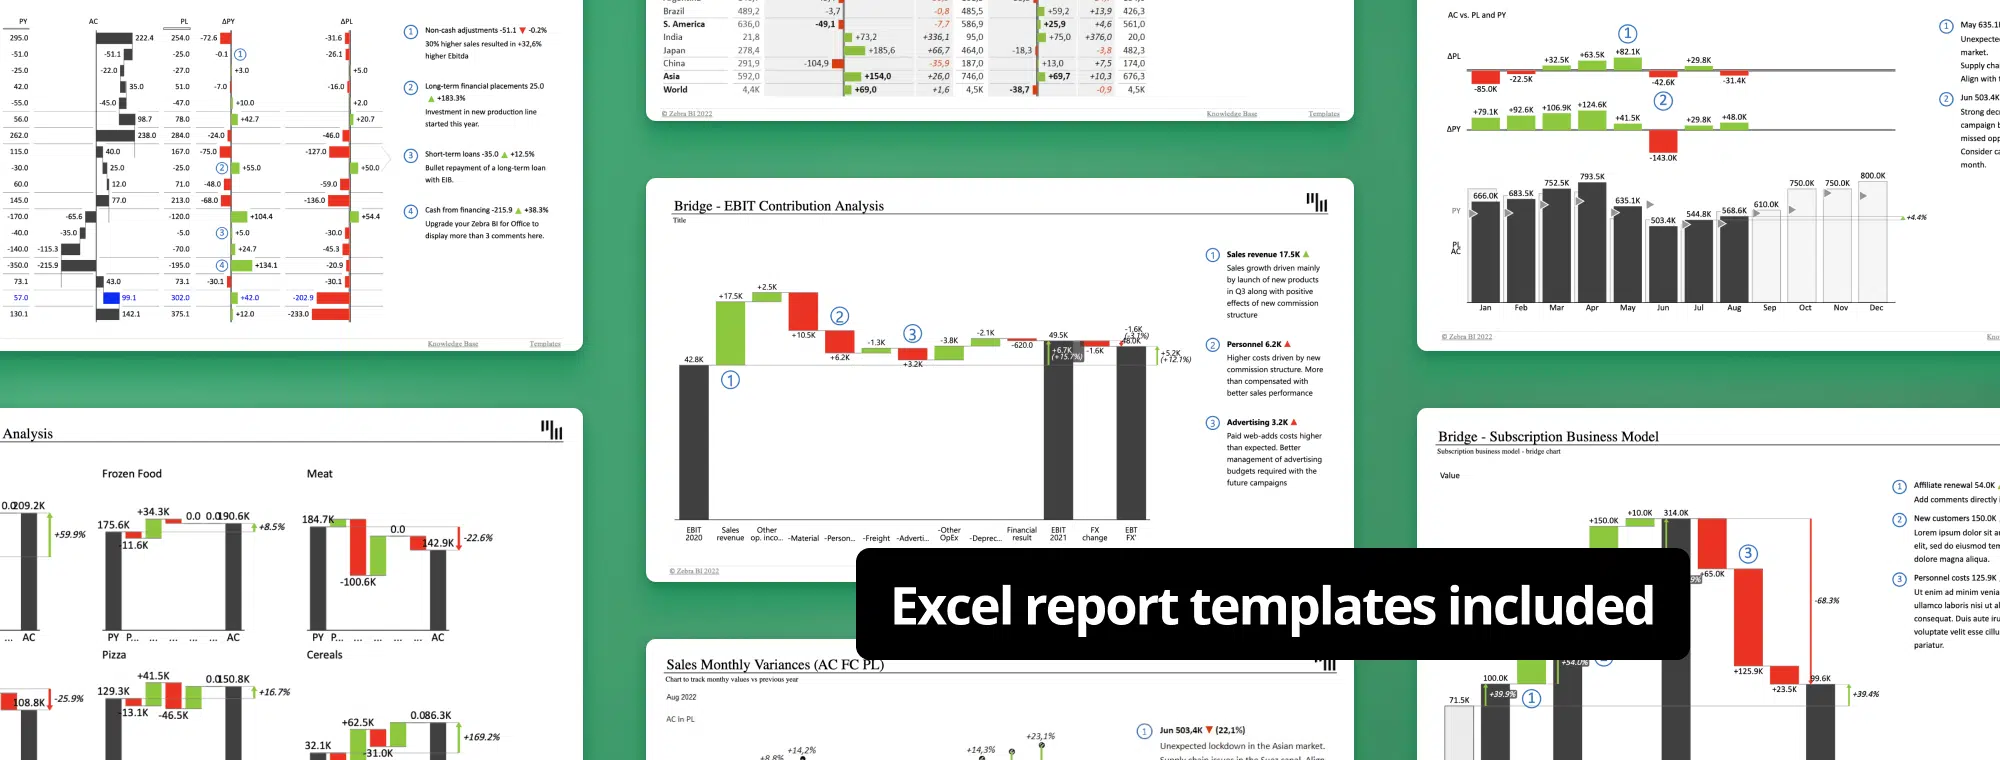 featured-image-excel-report-templates